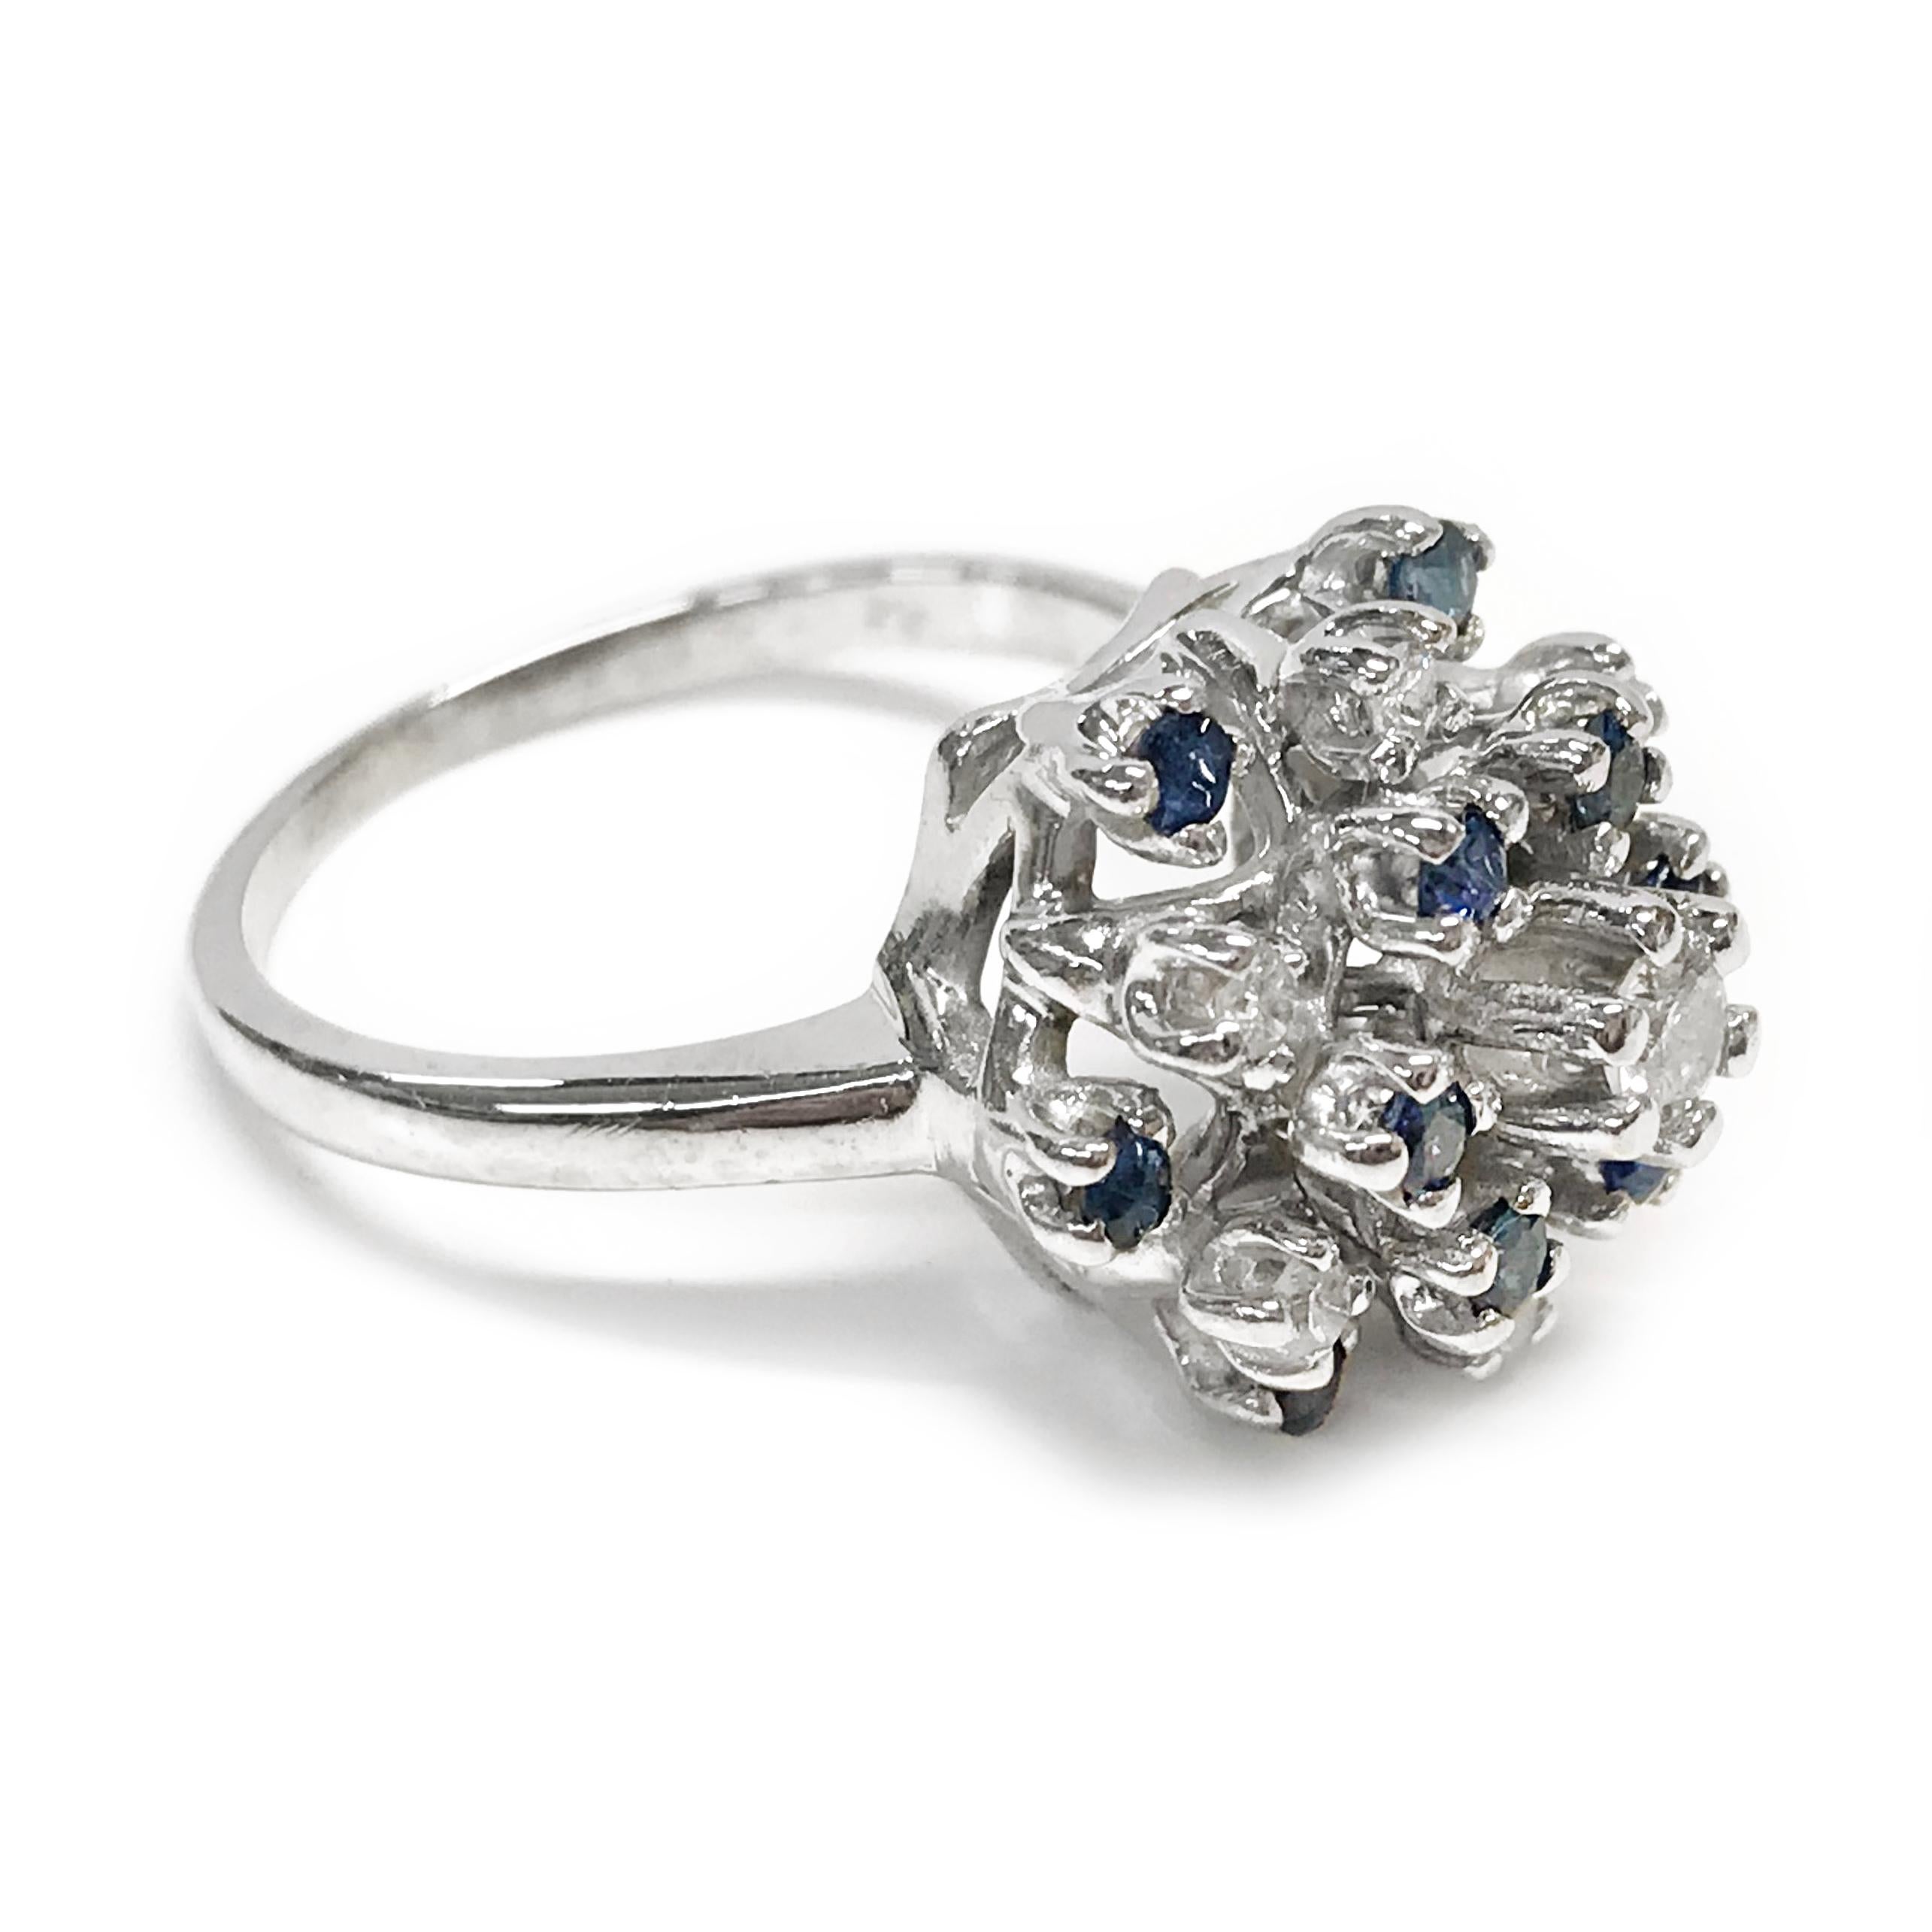 14 Karat White Gold Diamond Blue Sapphire Ring. The cluster ring features round diamonds and blue sapphires set in tiers of multiple heights. There is a total of seven diamonds, one 3.4mm at the center and six 0.018mm in a star shape. Twelve round